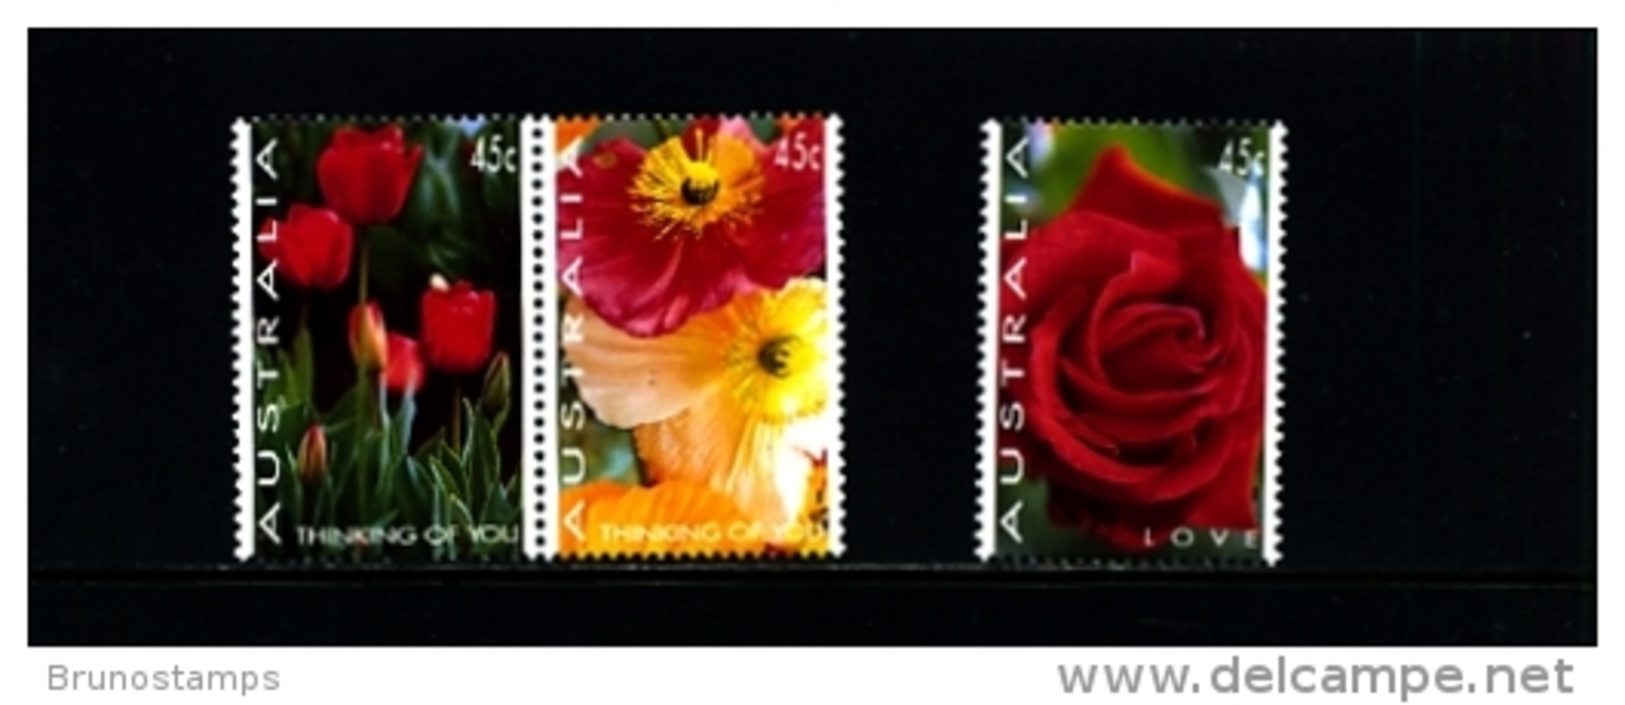 AUSTRALIA - 1994  GREETINGS STAMPS  SET  MINT NH - Mint Stamps